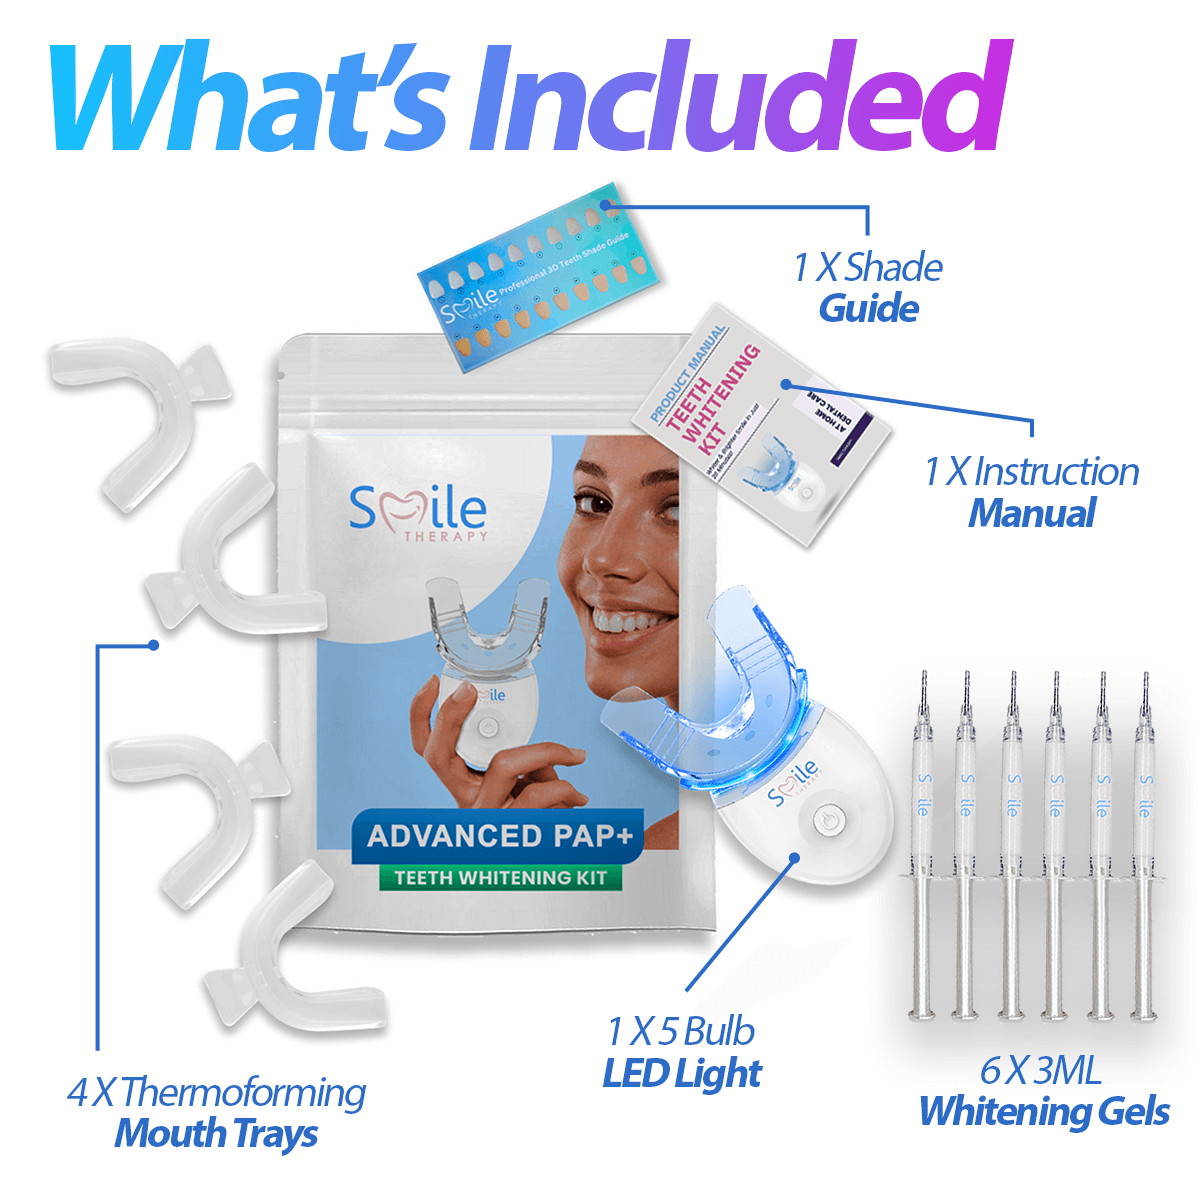 Professional Teeth Whitening Kit with LED Light - Fast Results, Safe for Home Use, Includes Gel & Tray DP7